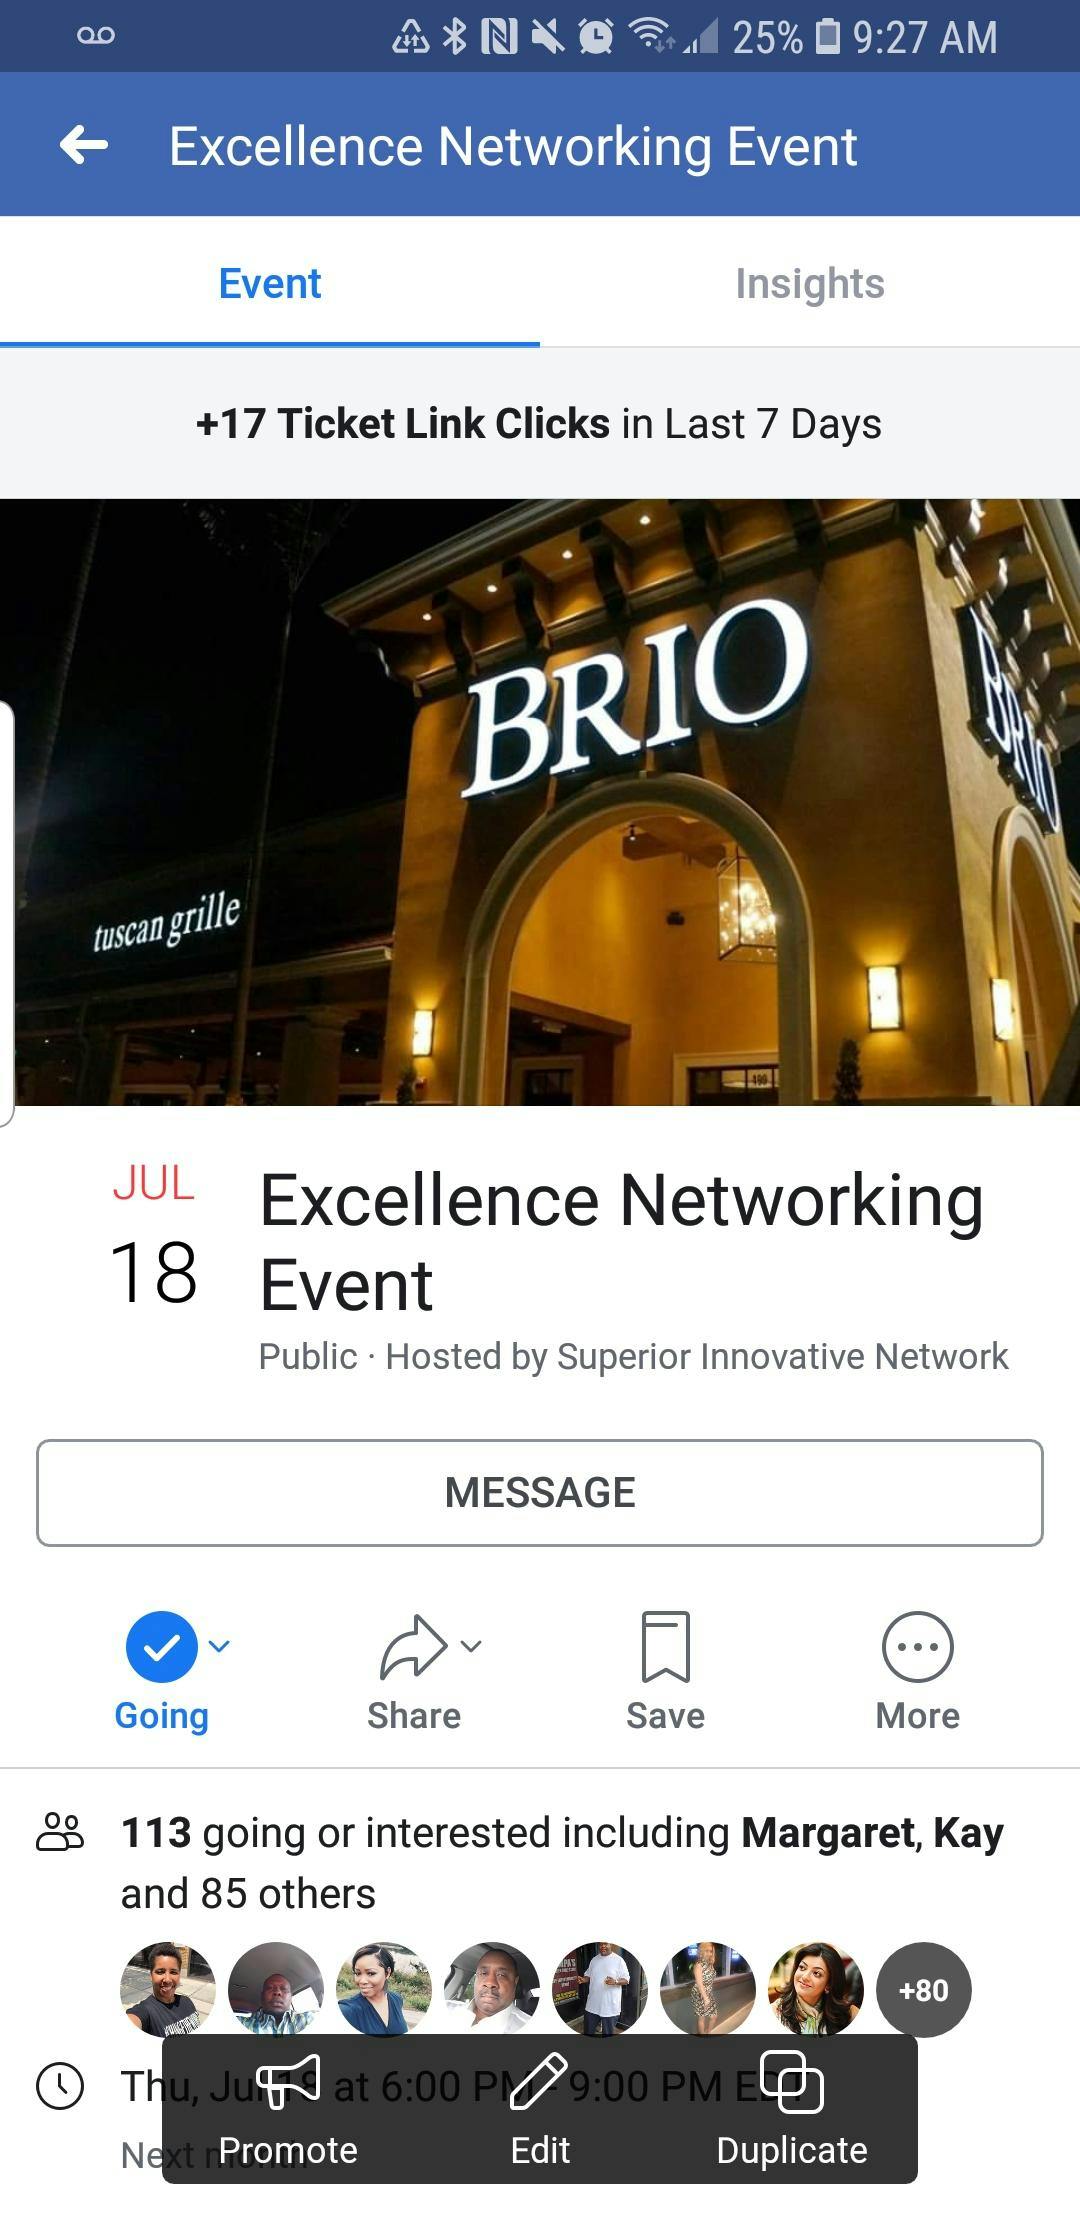 Excellence Networking Event